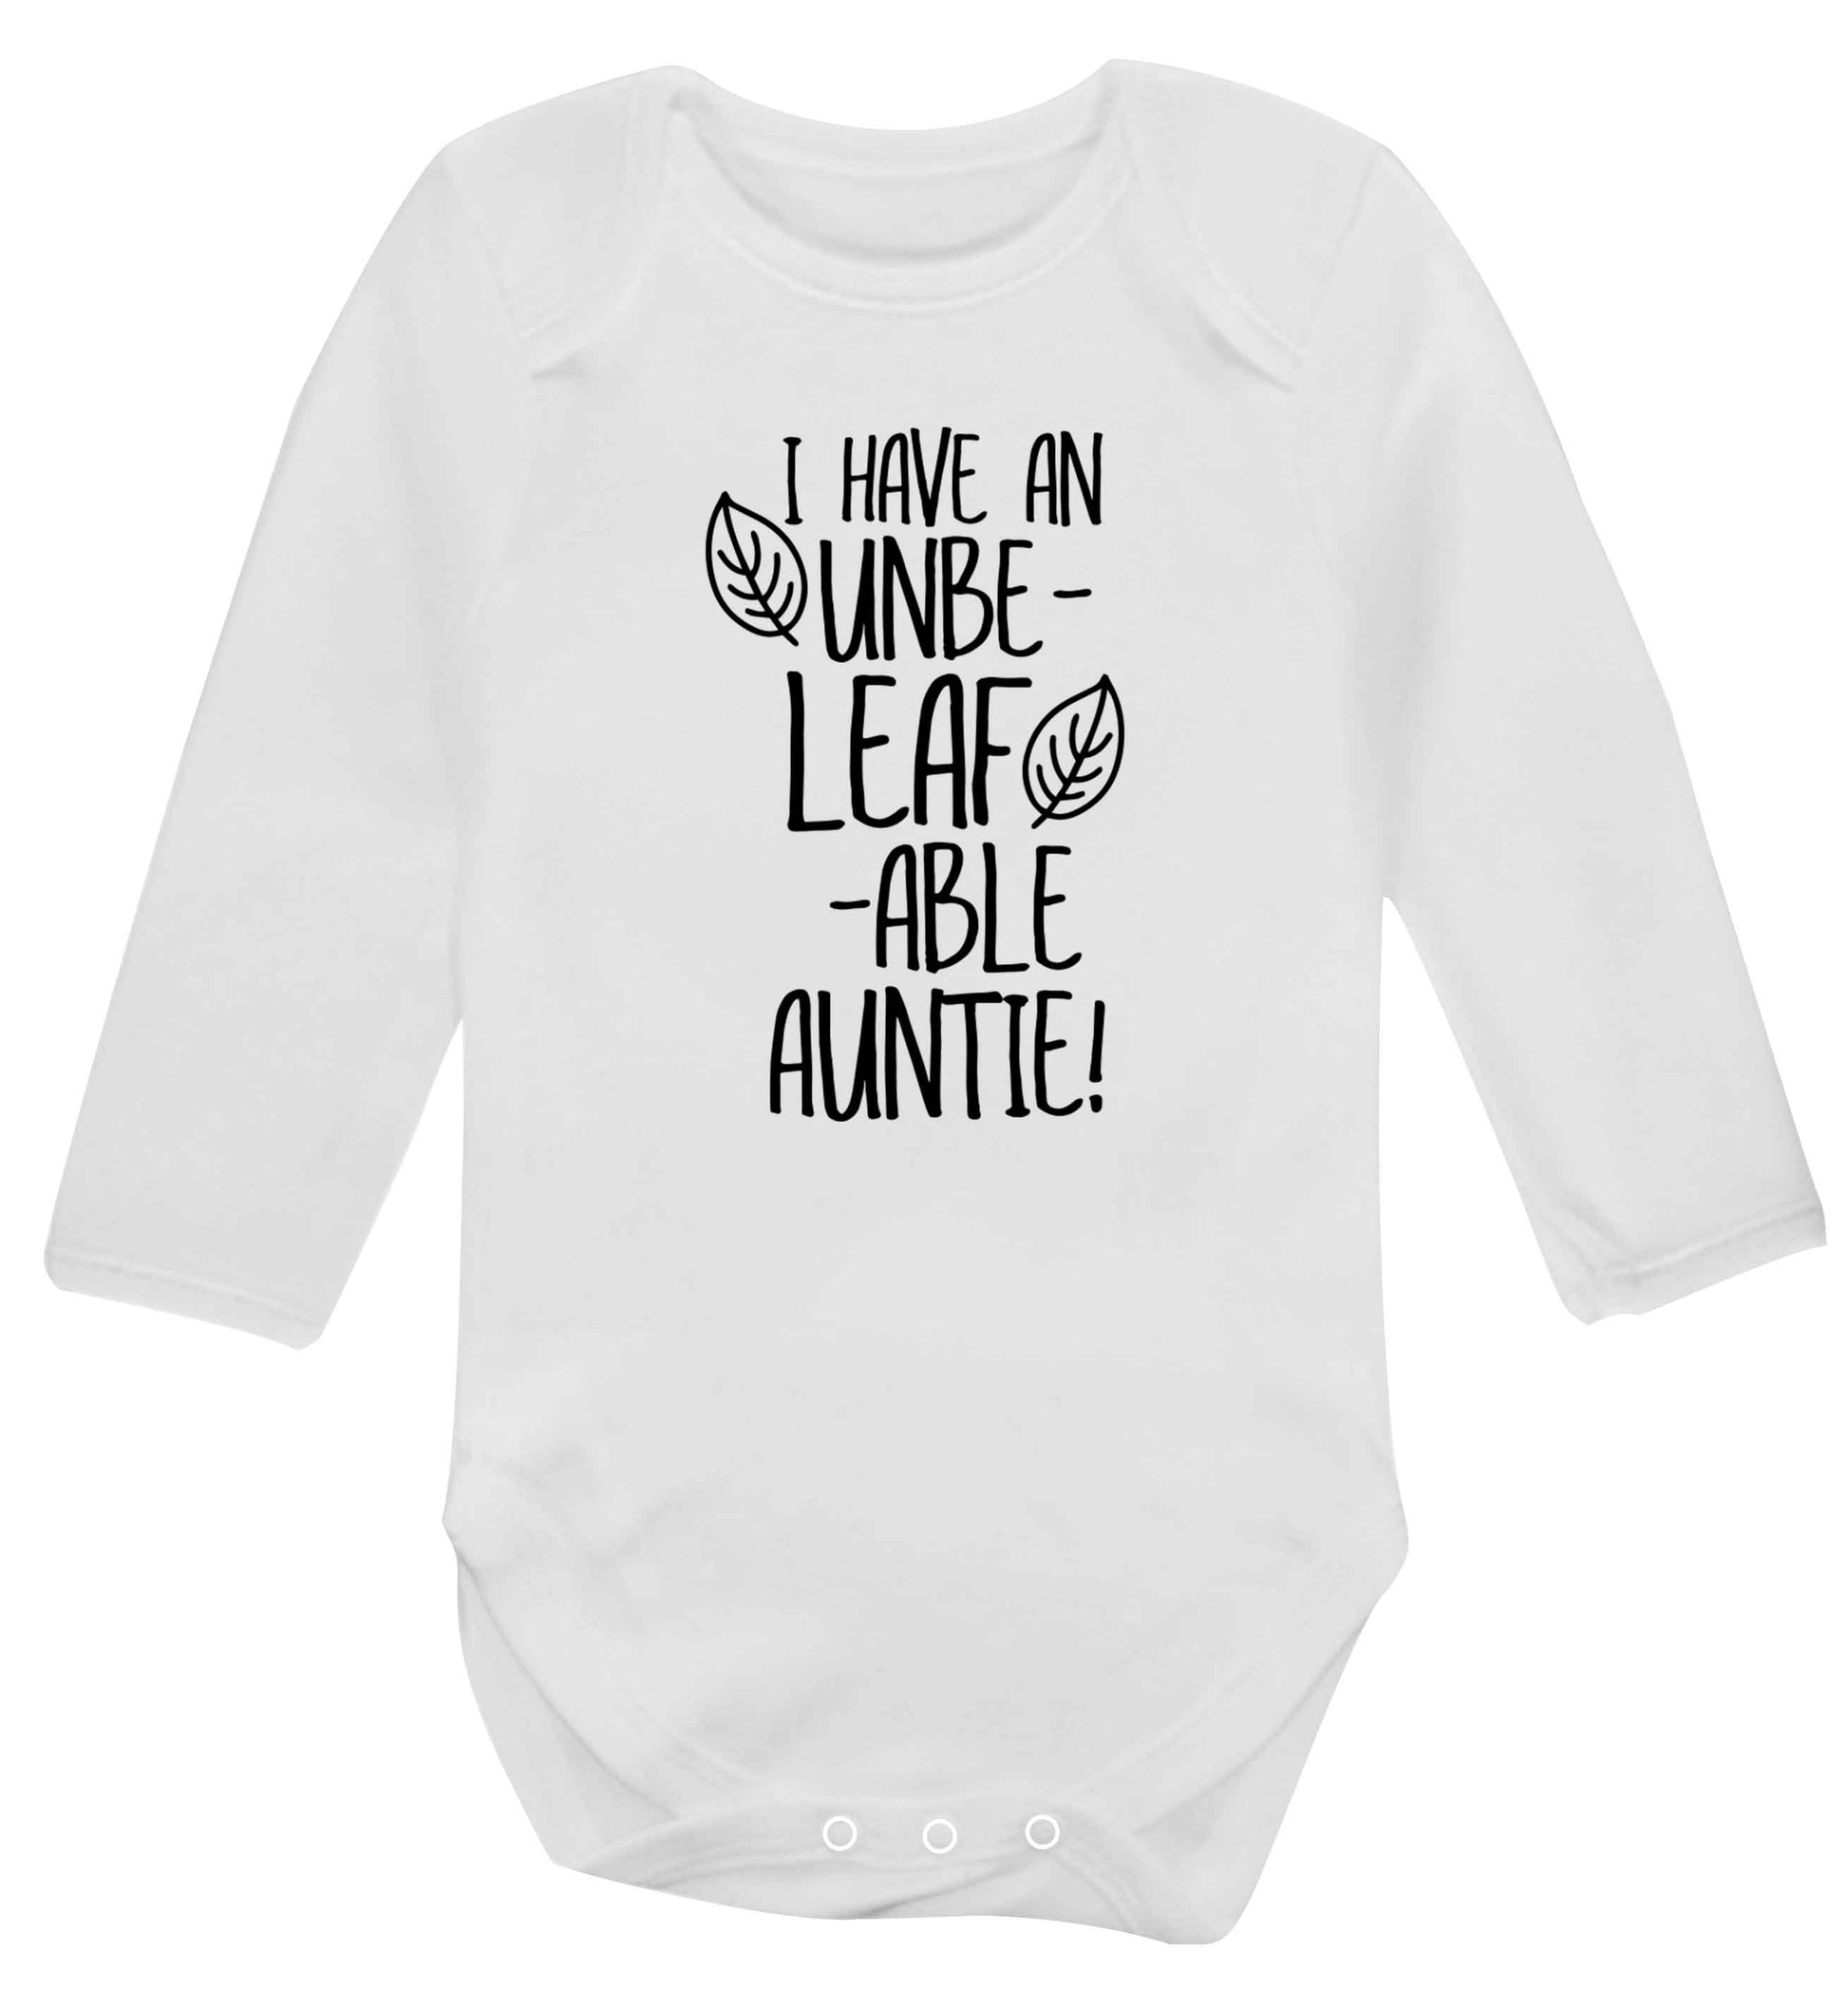 I have an unbe-leaf-able auntie Baby Vest long sleeved white 6-12 months